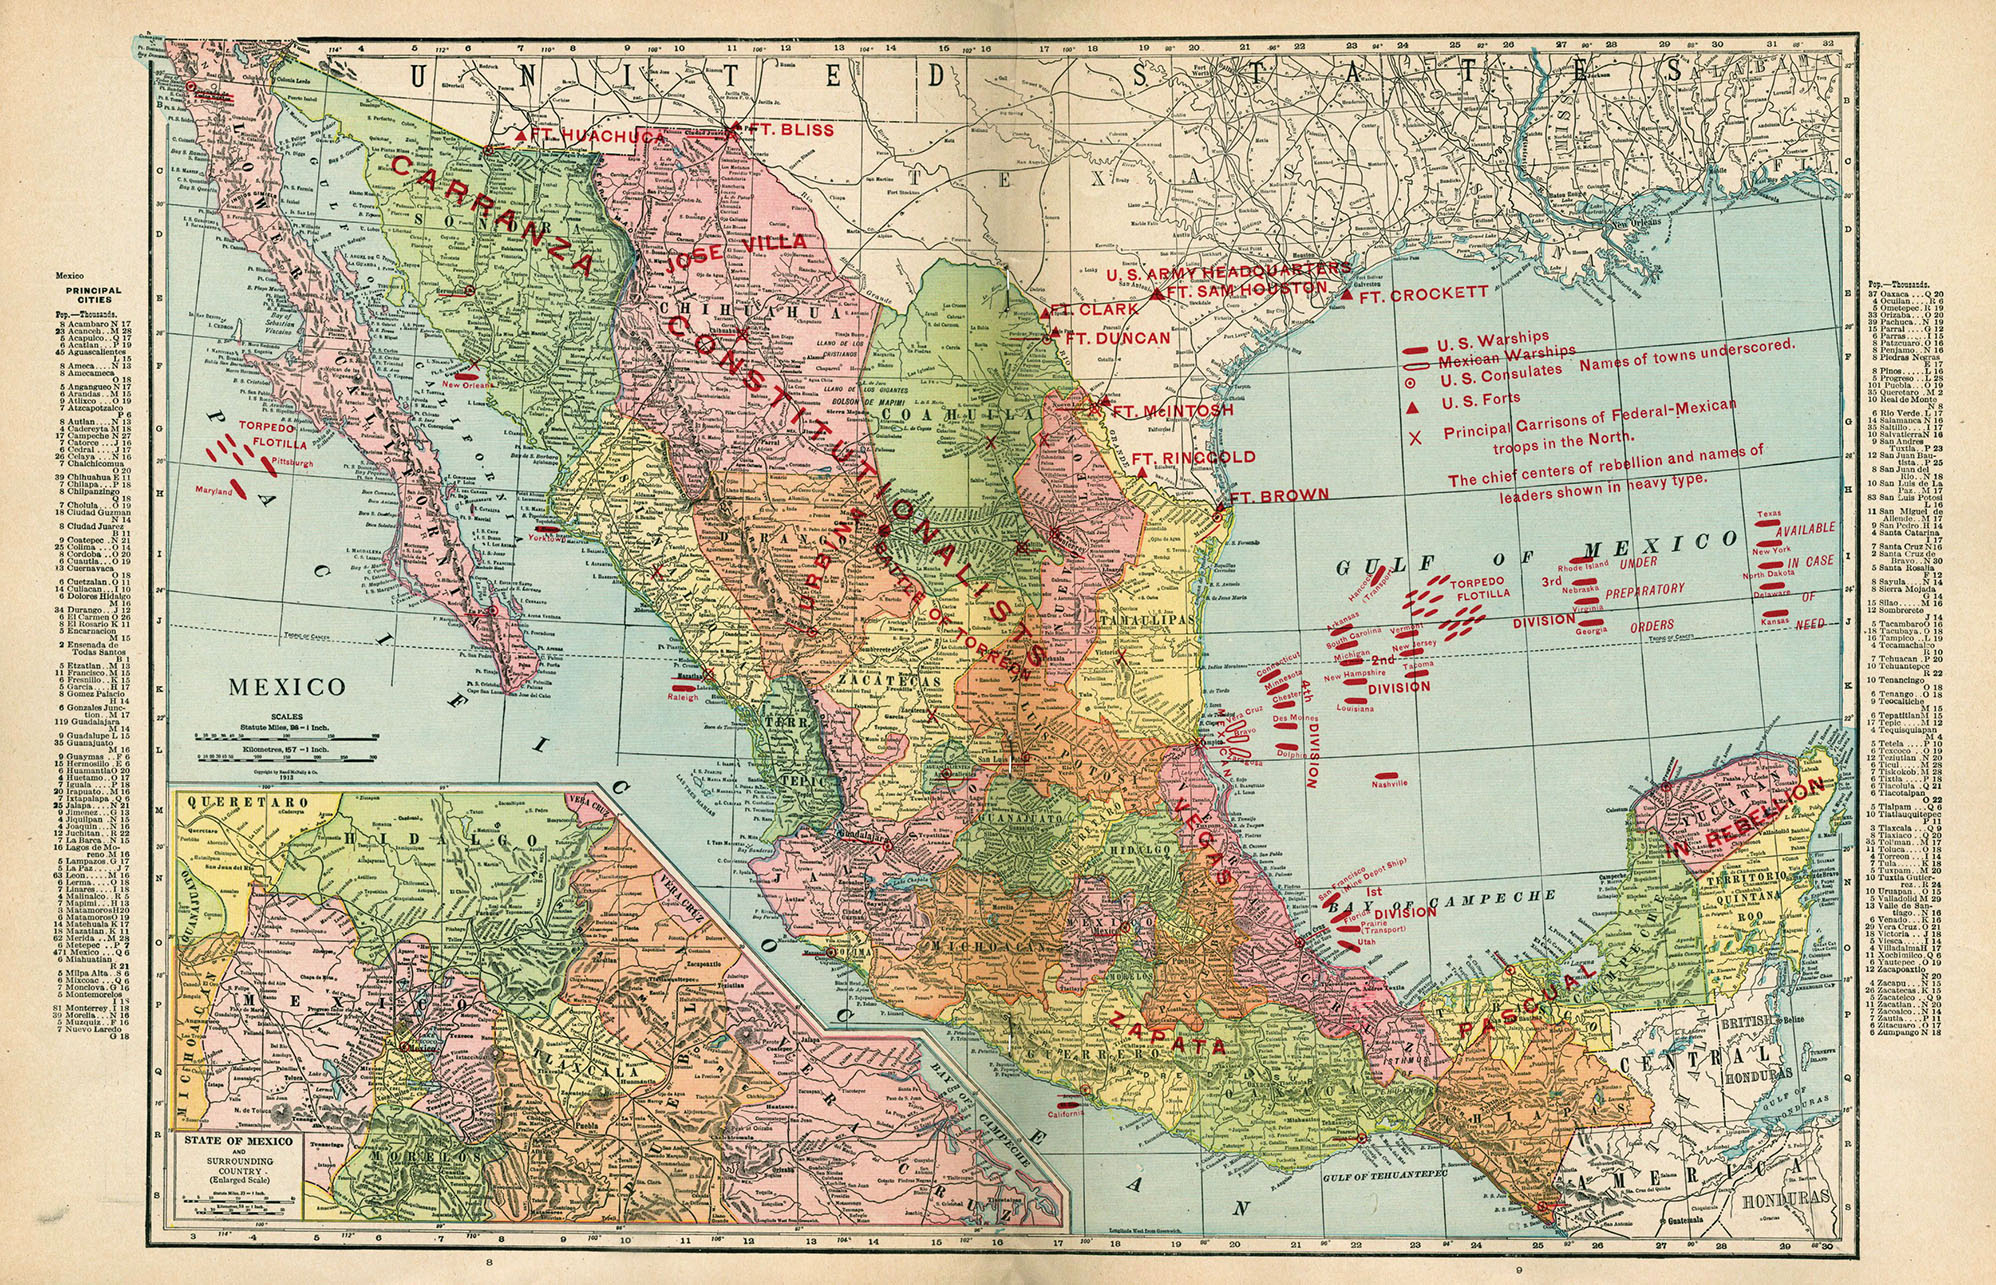 Regions under control of various caudillos are shown in this “Atlas of the Mexican Conflict” was published by Rand McNally and Company in 1914. (Image from The Newberry Independent Research Library.)